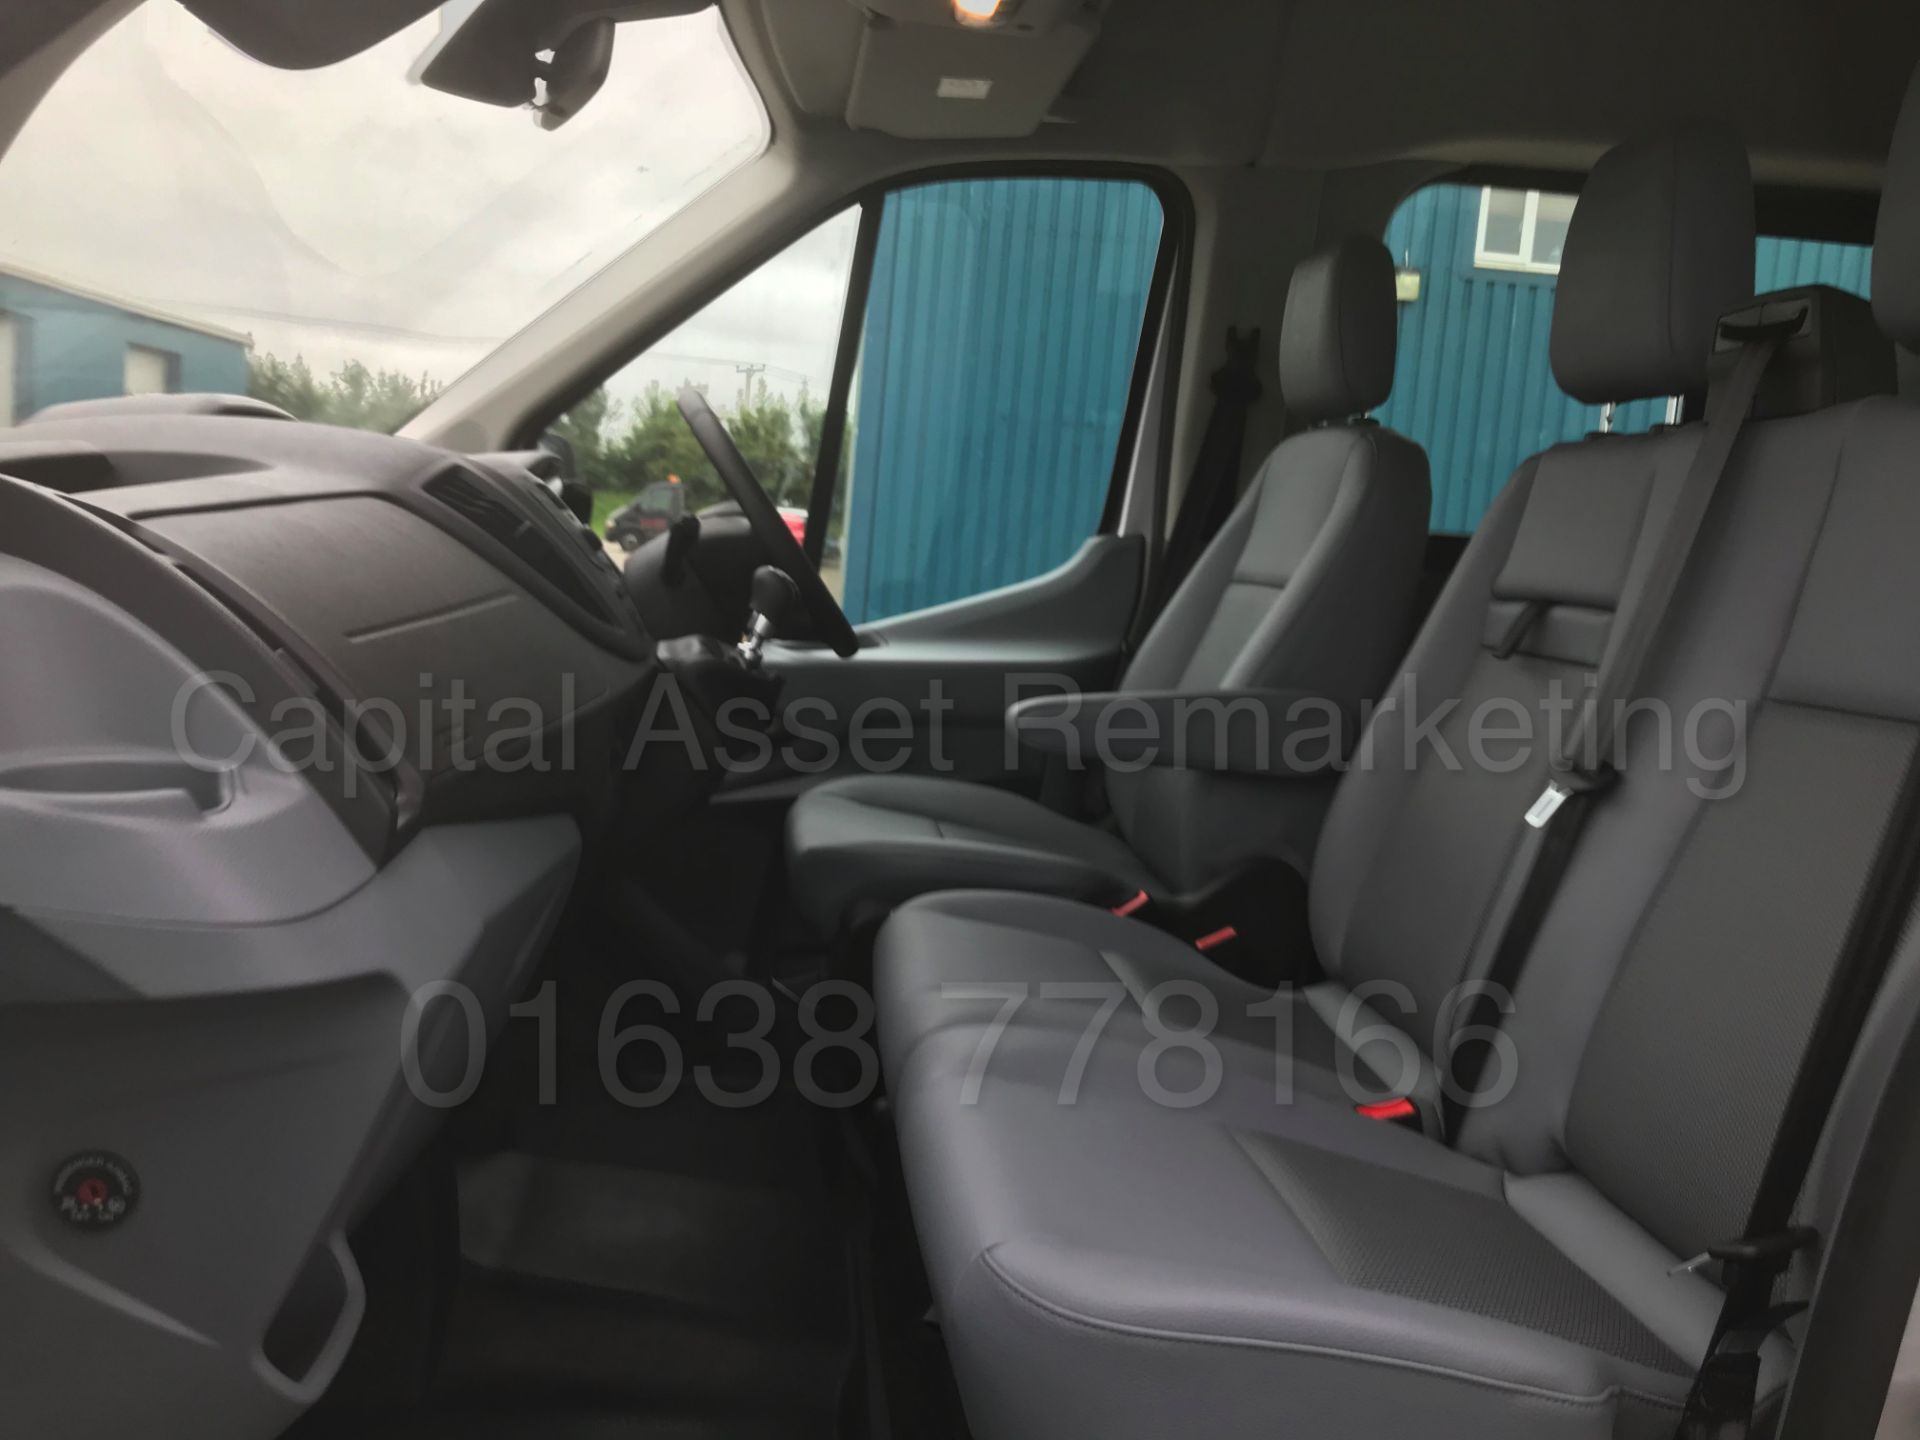 (On Sale) FORD TRANSIT LWB '15 SEATER MINI-BUS' (2018) '2.2 TDCI -125 BHP- 6 SPEED' 130 MILES ONLY ! - Image 23 of 50